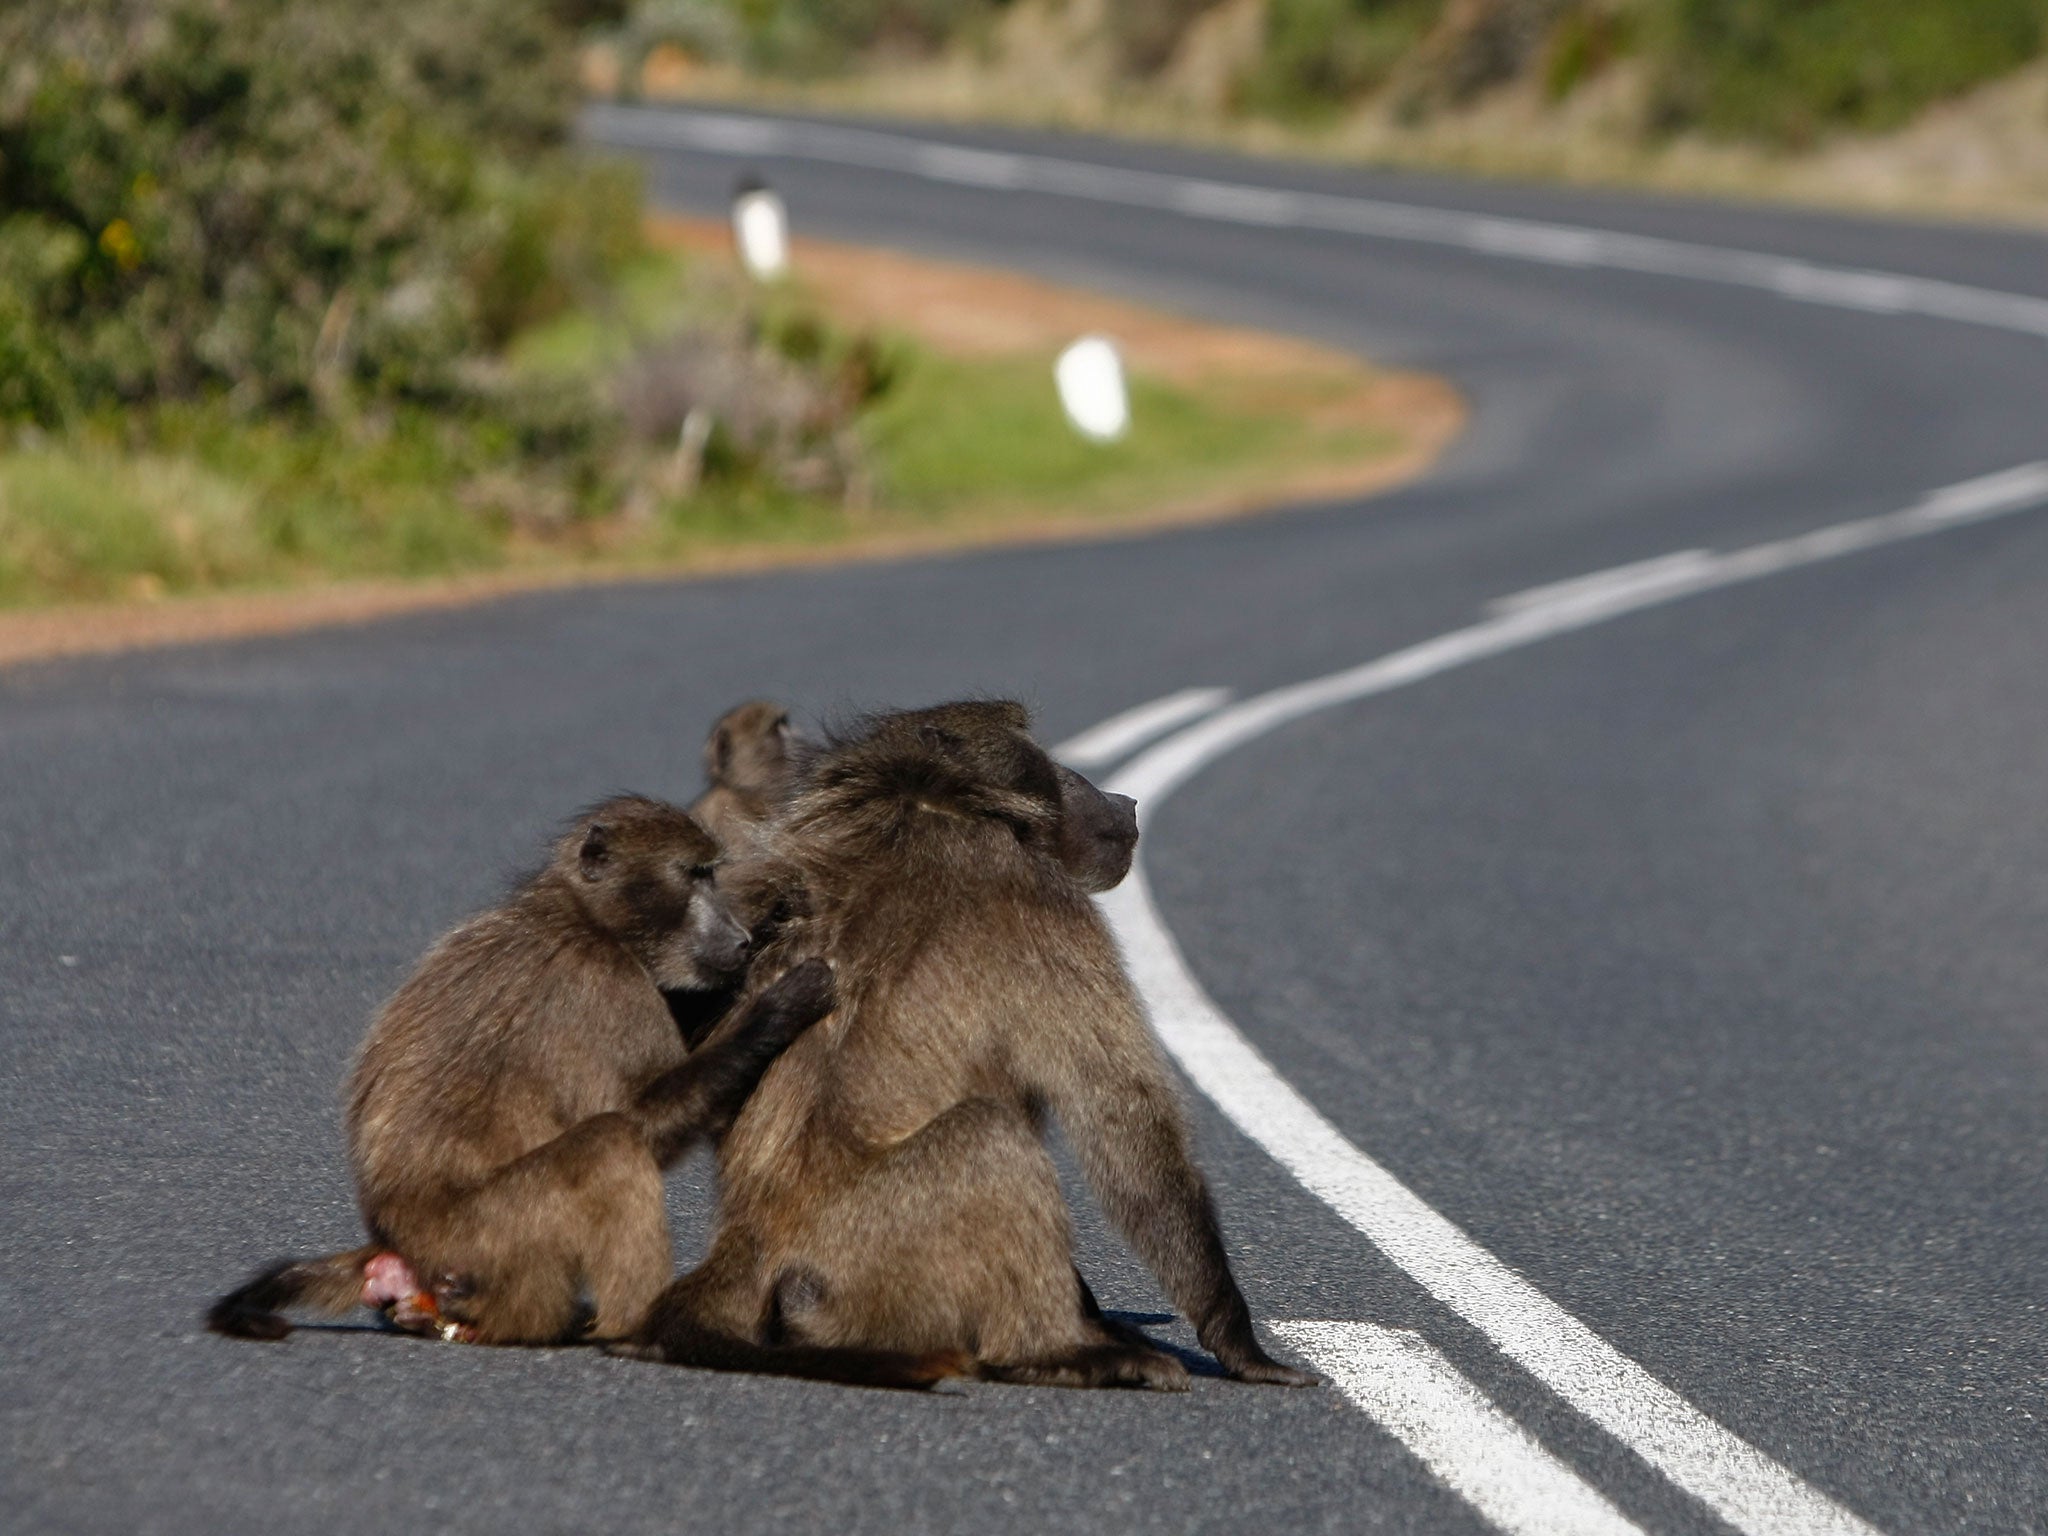 The study of chacma baboons showed they tended to keep to similar social groupings